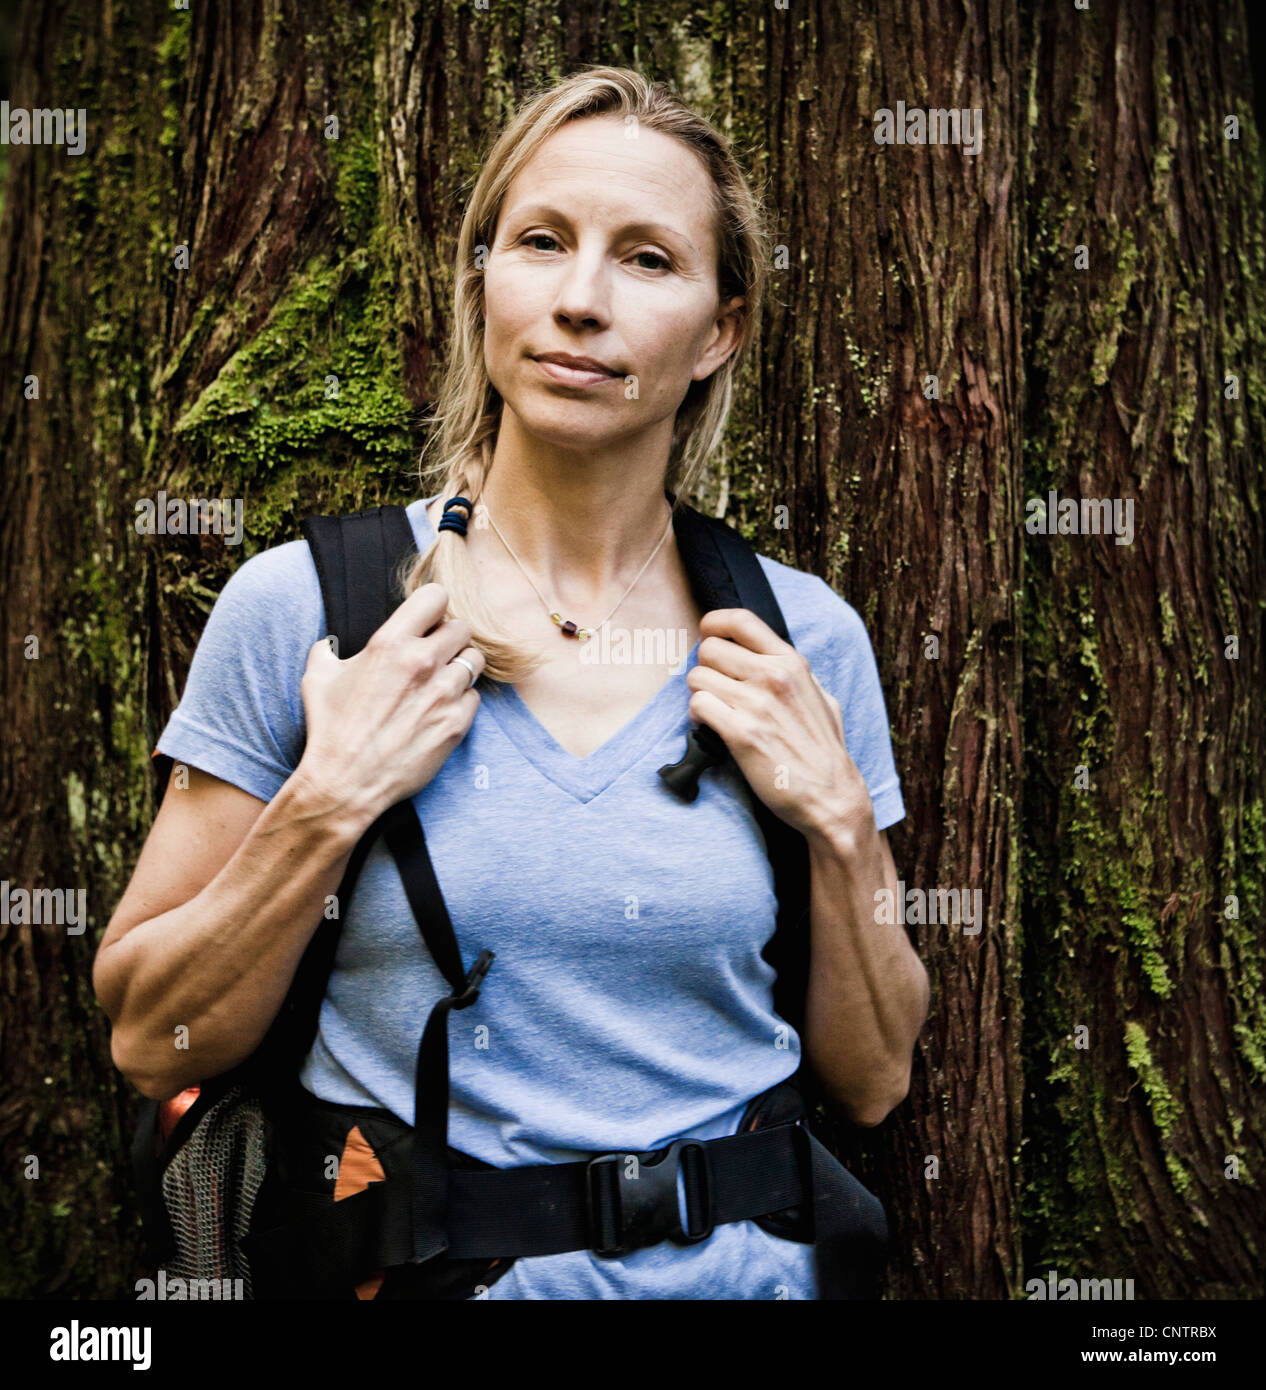 Portrait of a middle aged Caucasian woman wearing a backpack, Little Si trail, Washington, USA. Stock Photo